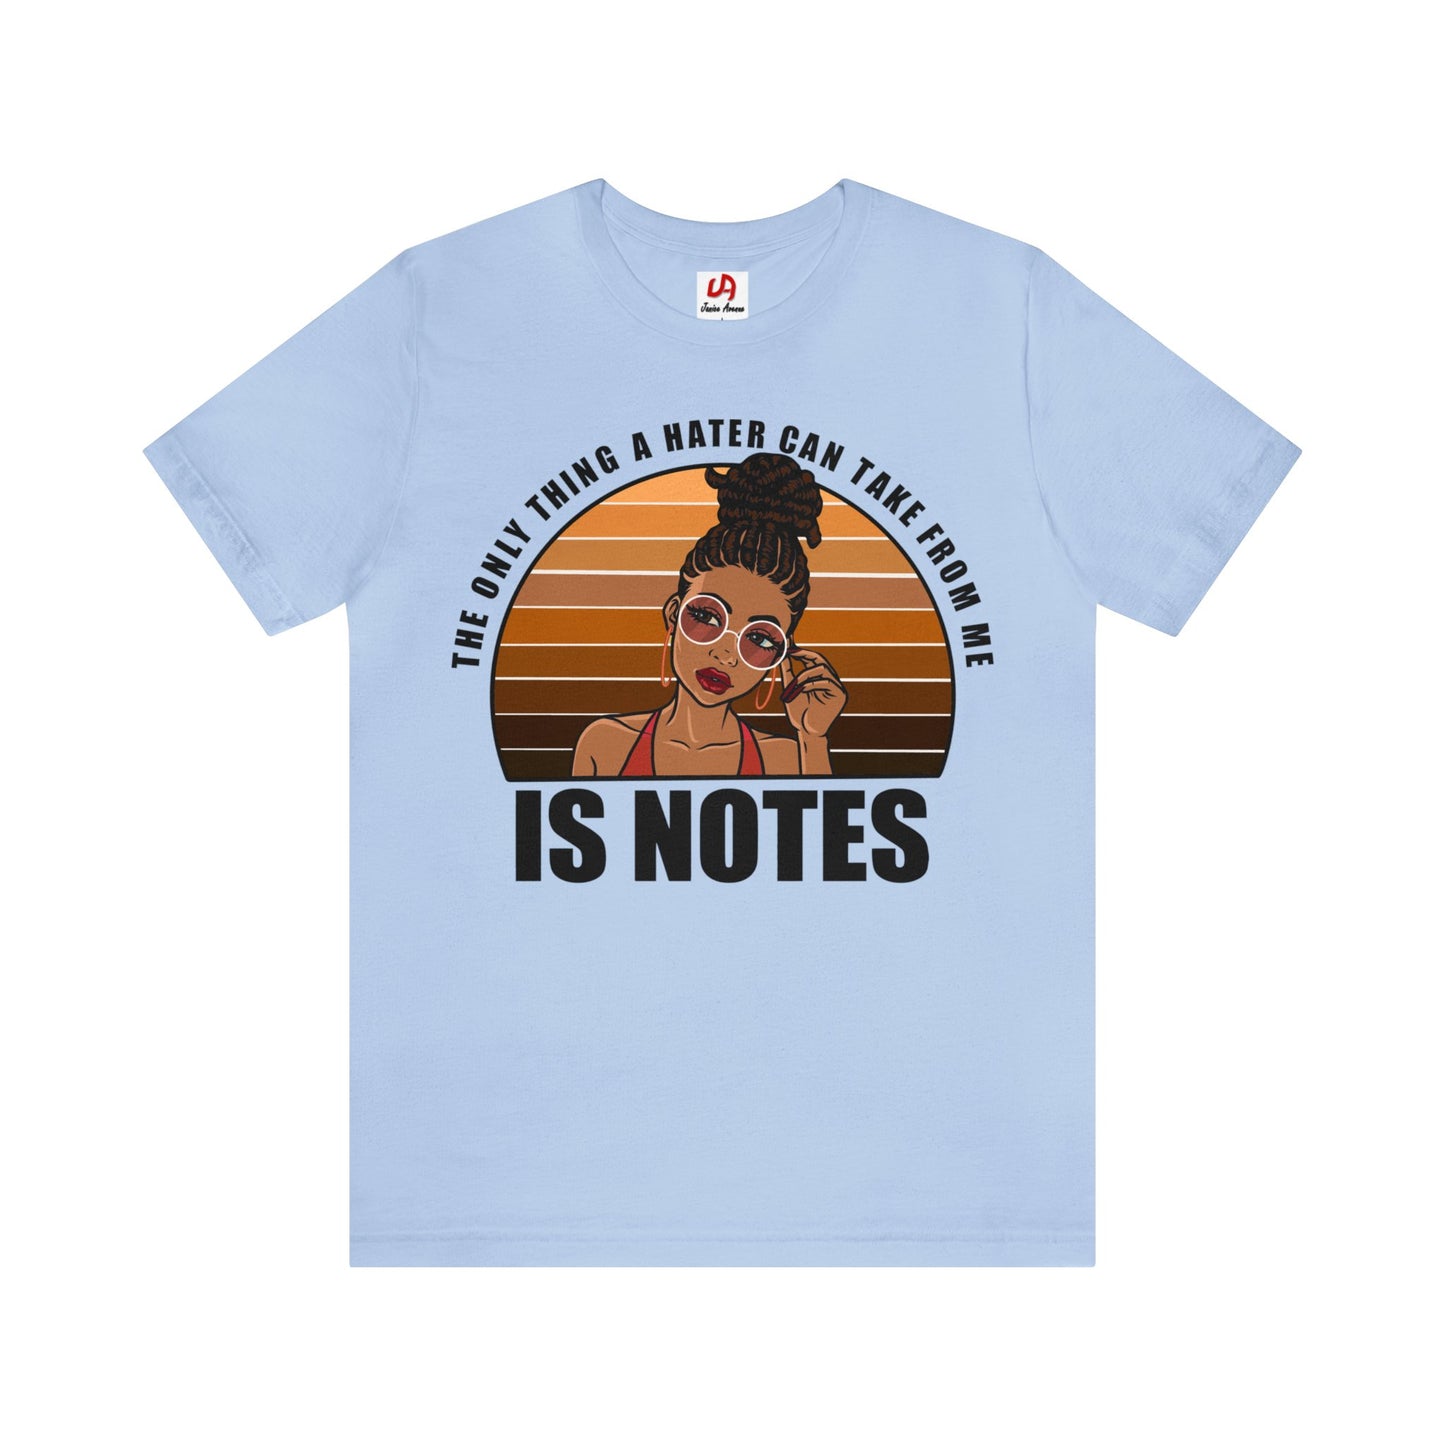 Women's Haters Take Note Shirt - Black Text